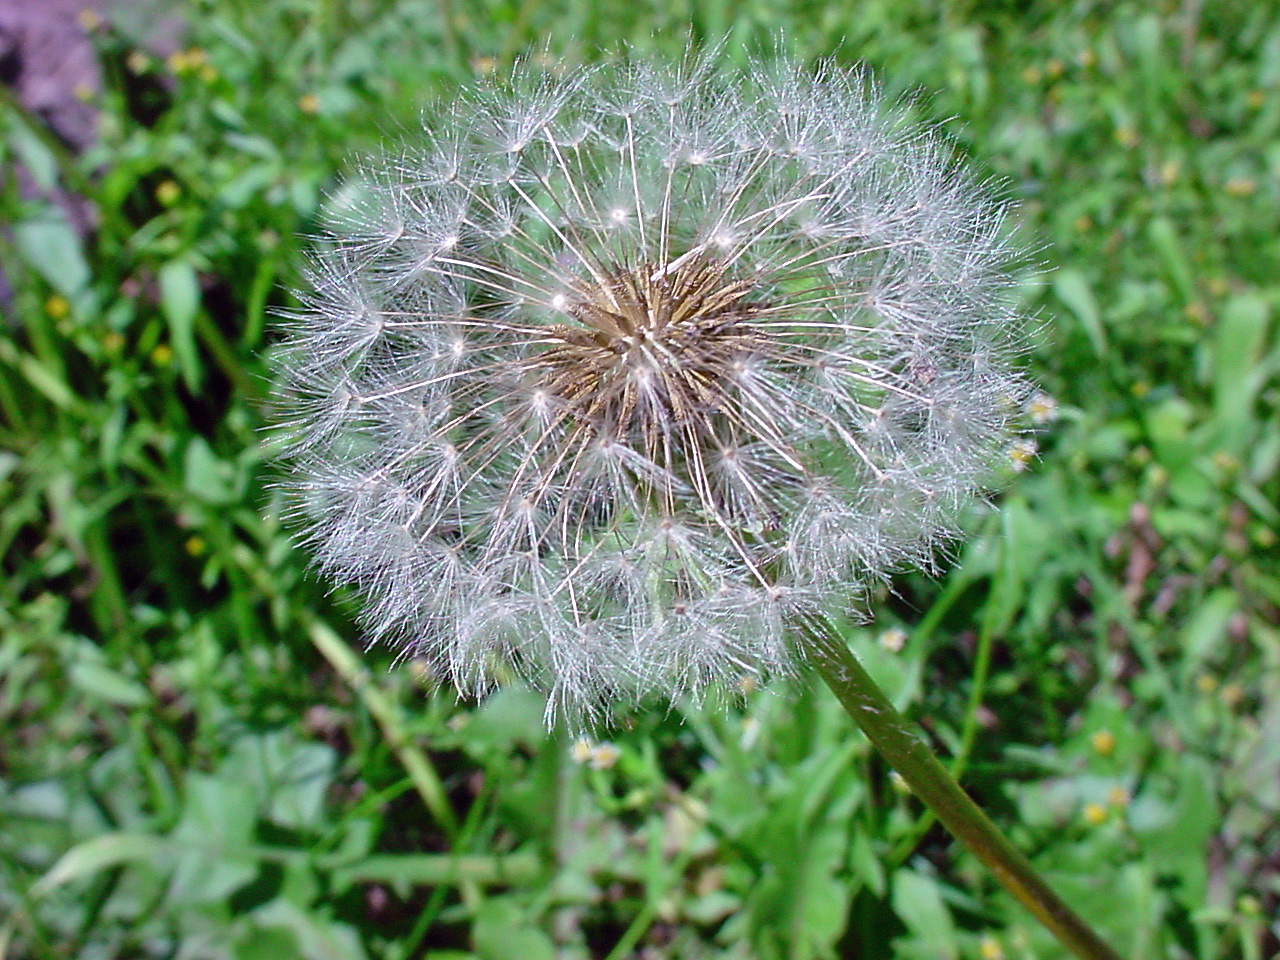 After blooming, the flow becomes a white puff of seeds